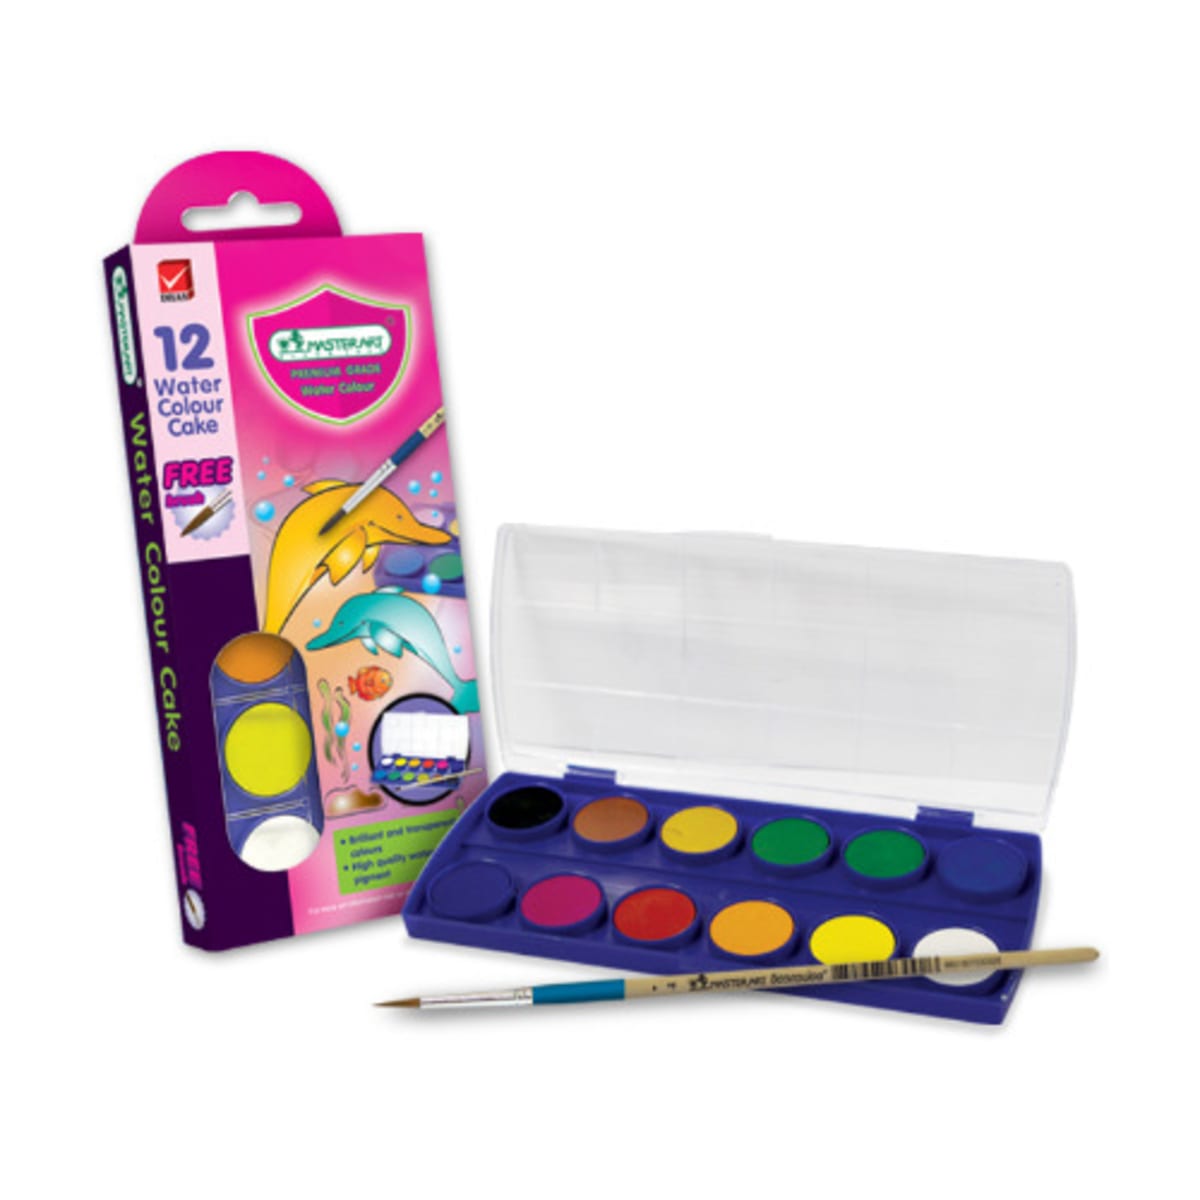 Camel Student Water Colour Cakes - 12 Shades - Starbox